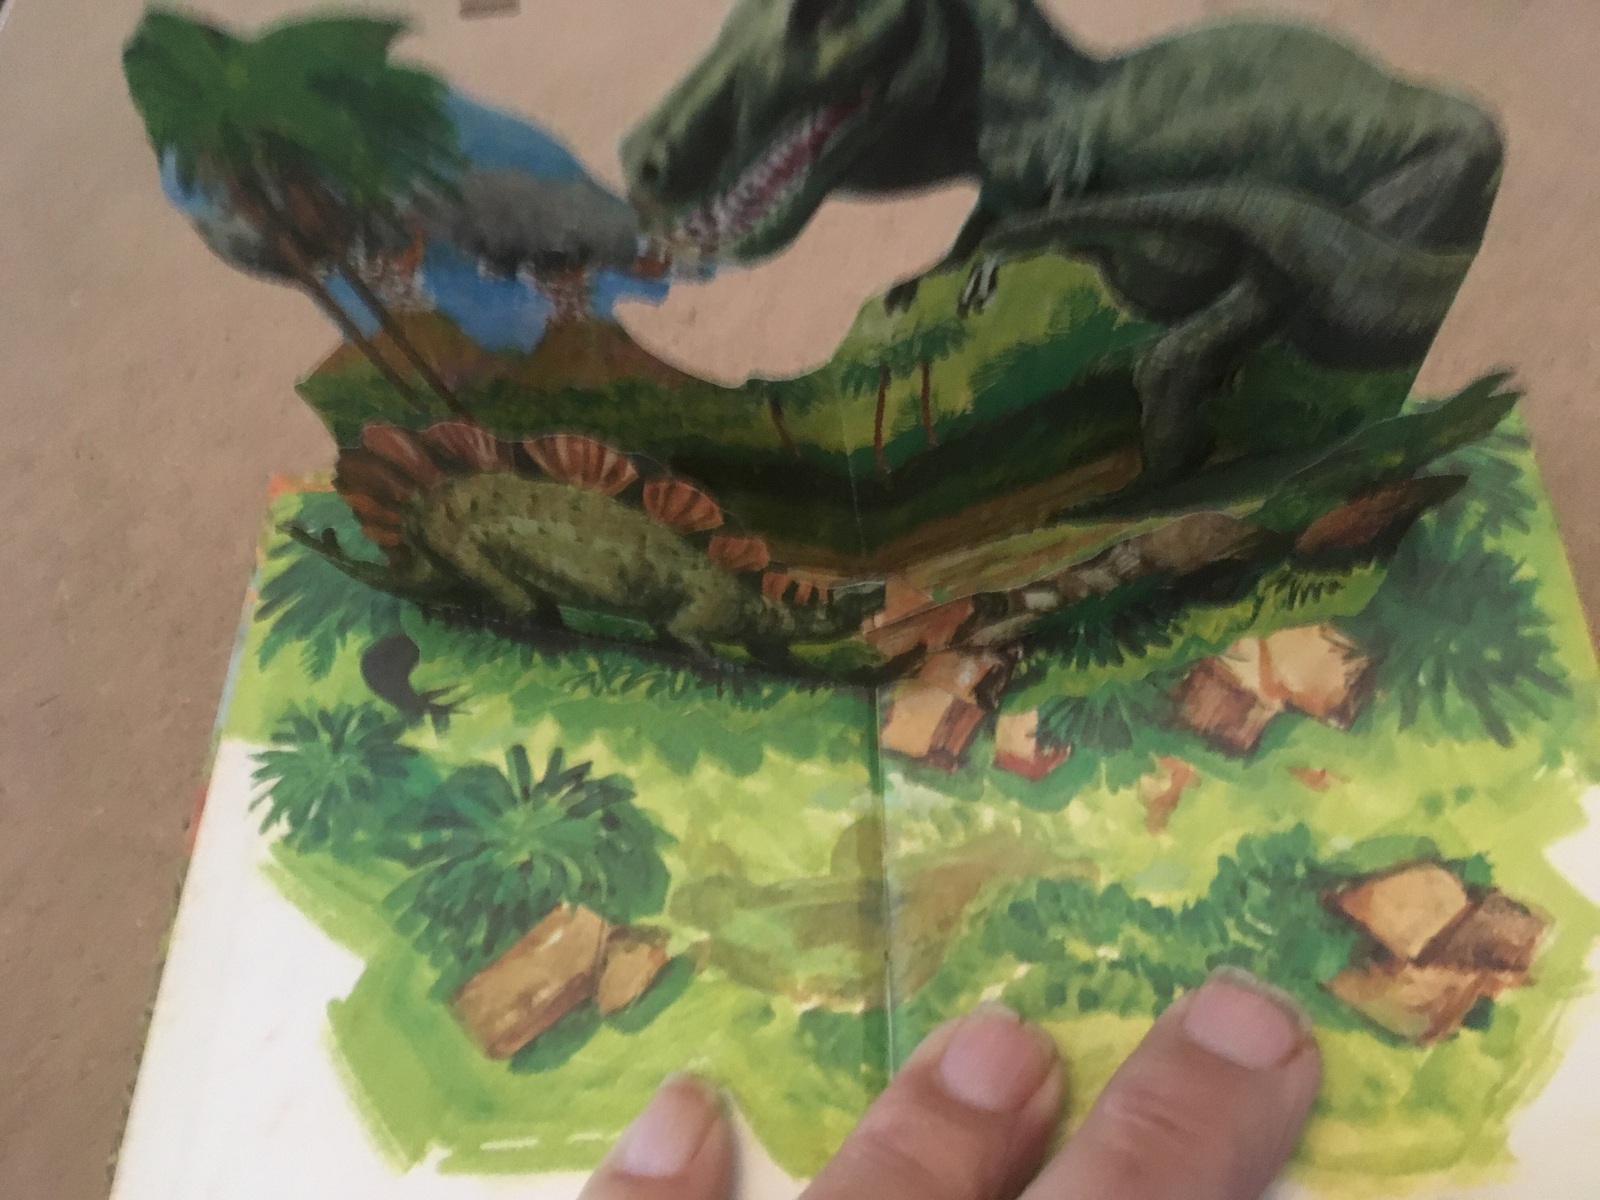 The Terrible Lizards: A Pop-Up Book  - $20.00